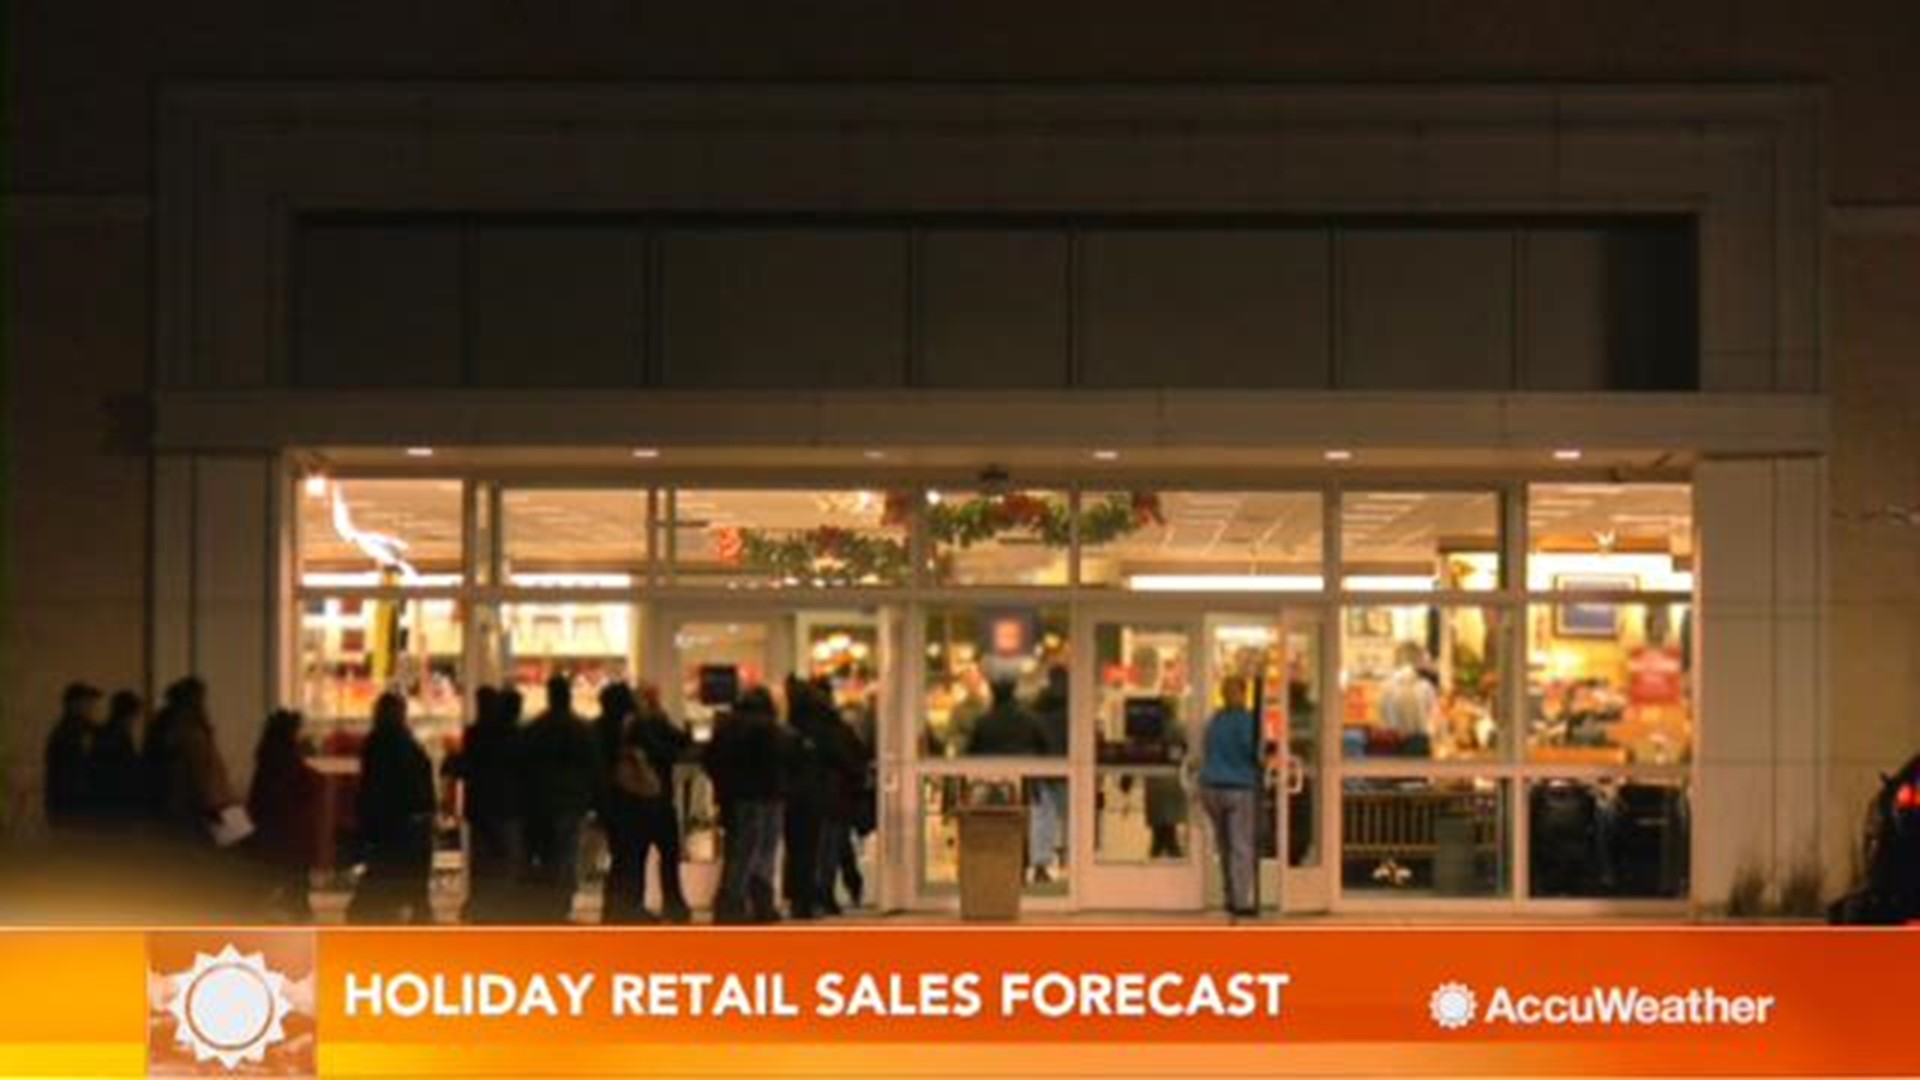 Most holiday sales estimates only at economic trends, but AccuWeather's forecast goes even further, which is why it's proven to be so accurate.